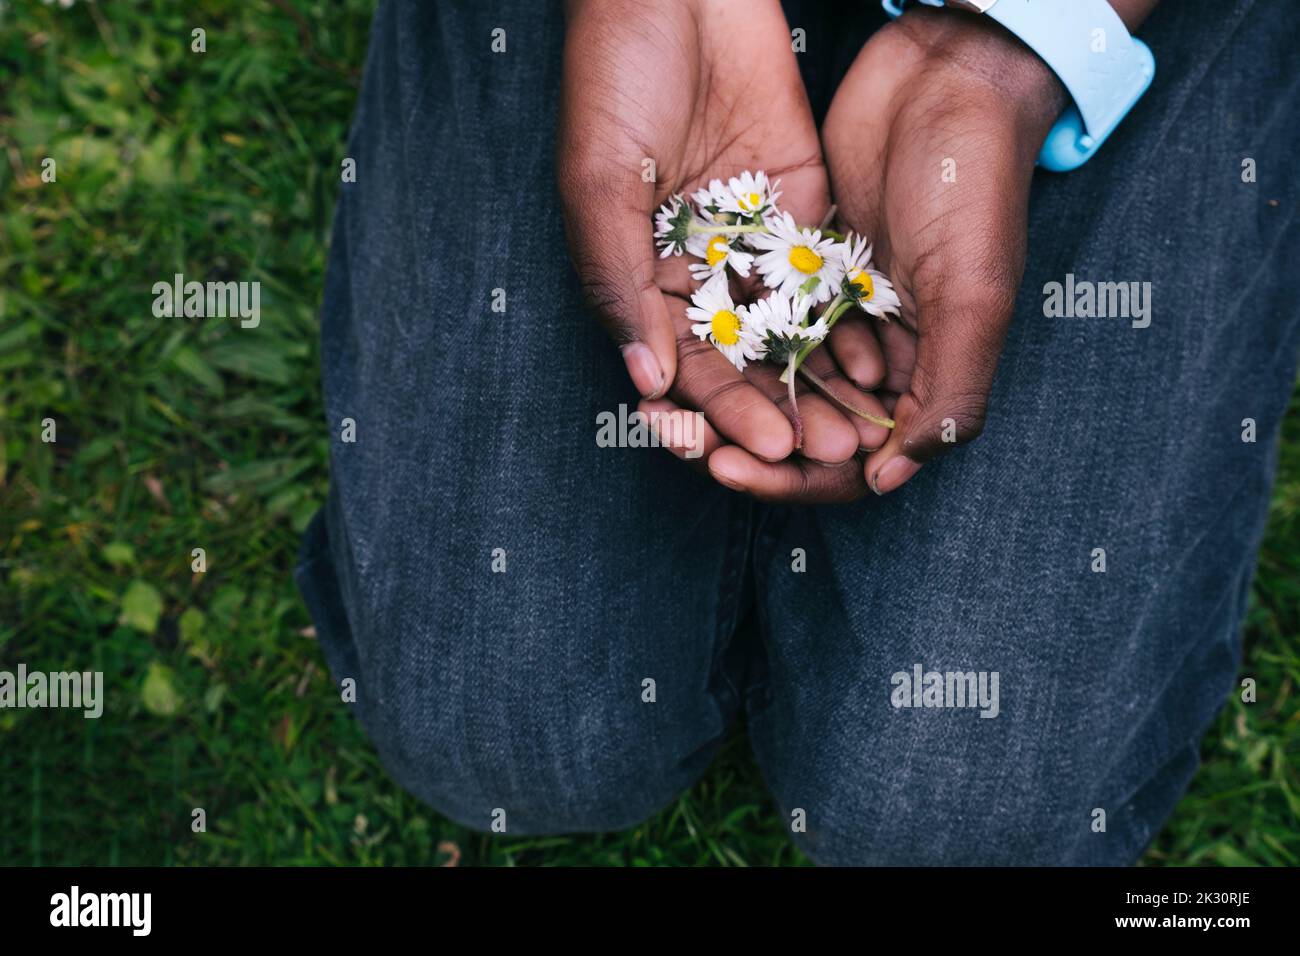 Hands of man holding white daisies in park Stock Photo